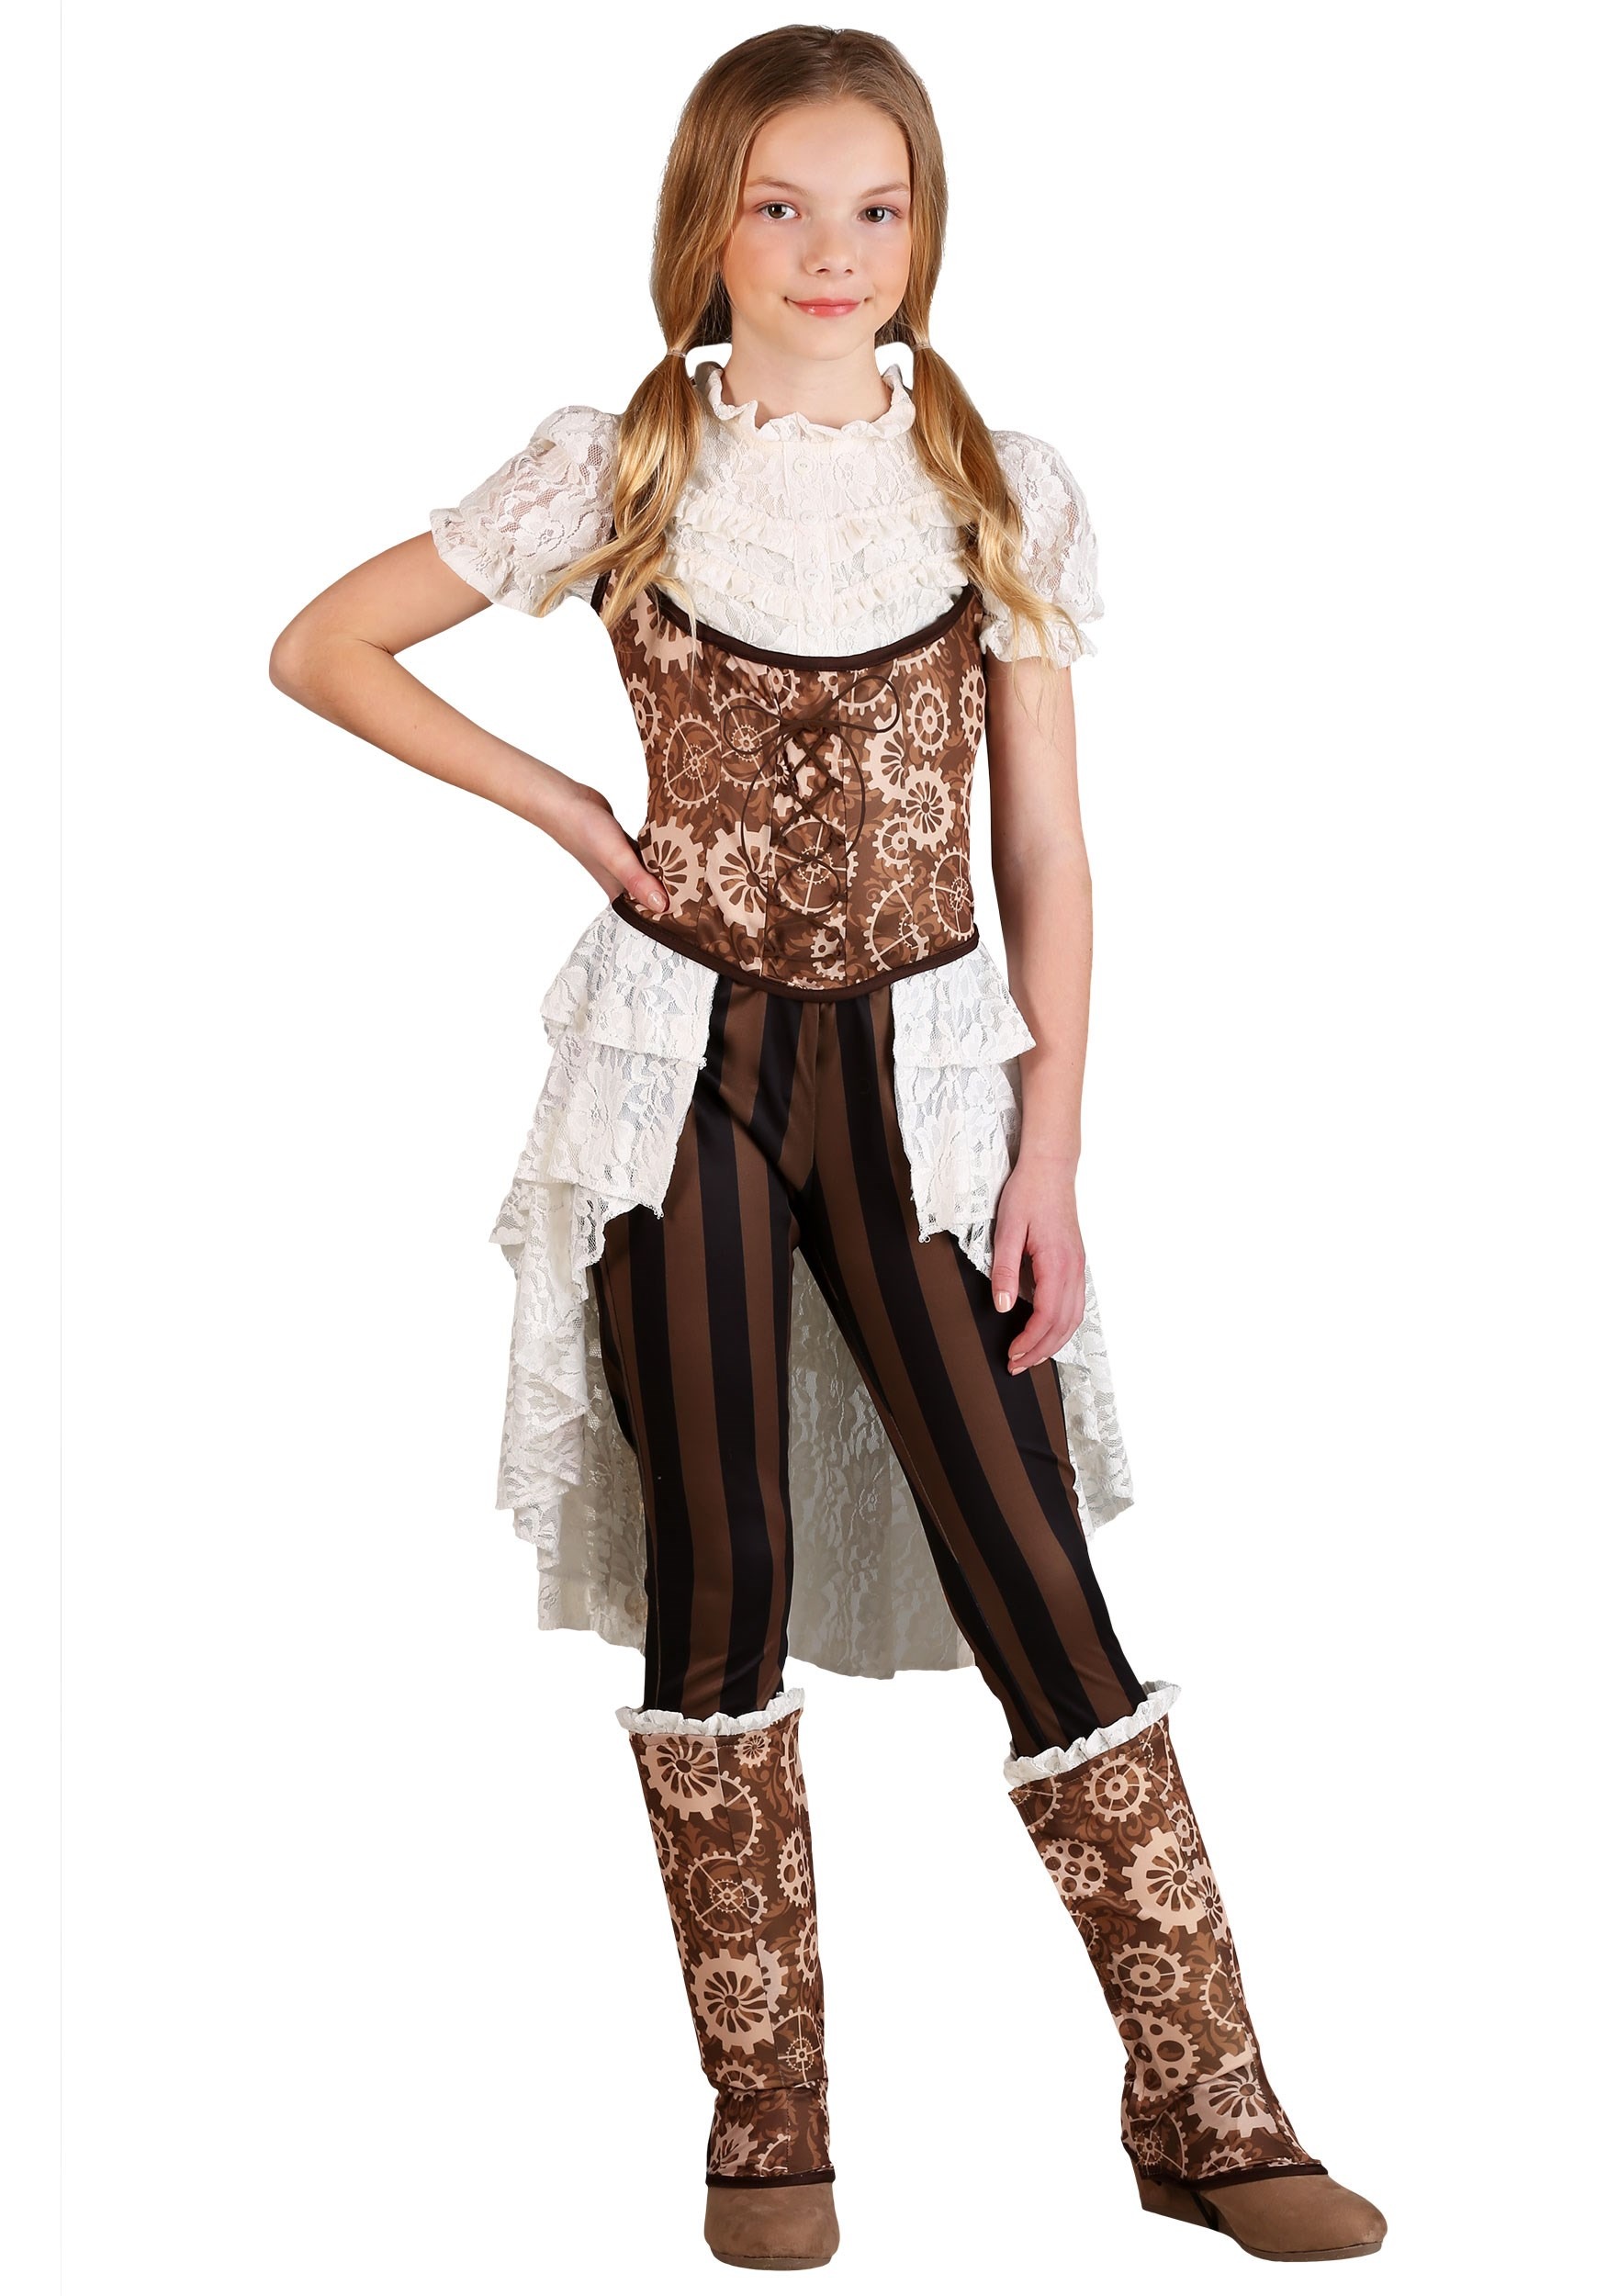 Photos - Fancy Dress FUN Costumes Steampunk Victorian Lady Girl's Costume Brown/Yellow/